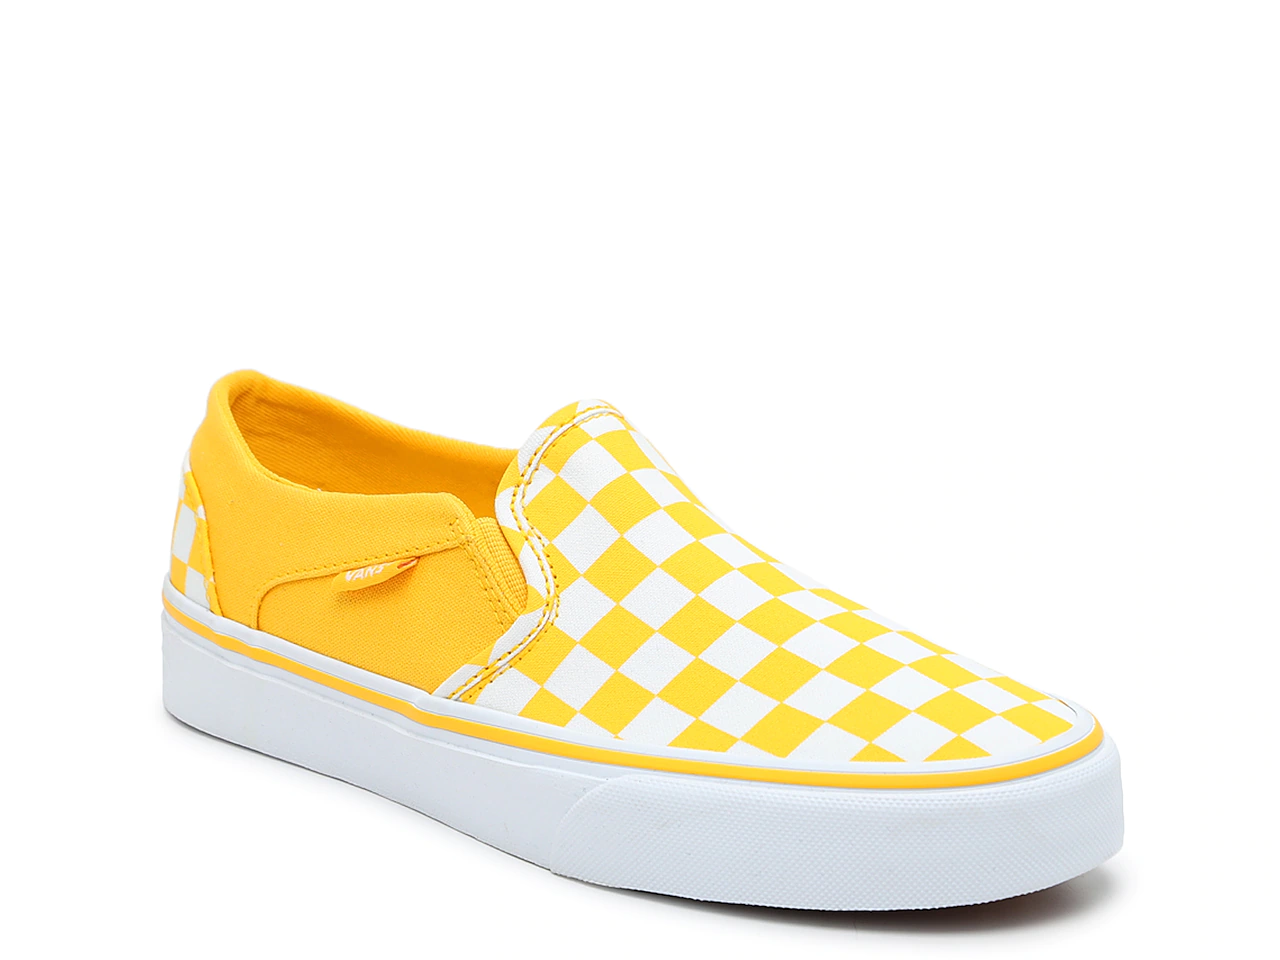 A Vans slip on shoe in bright checkered yellow